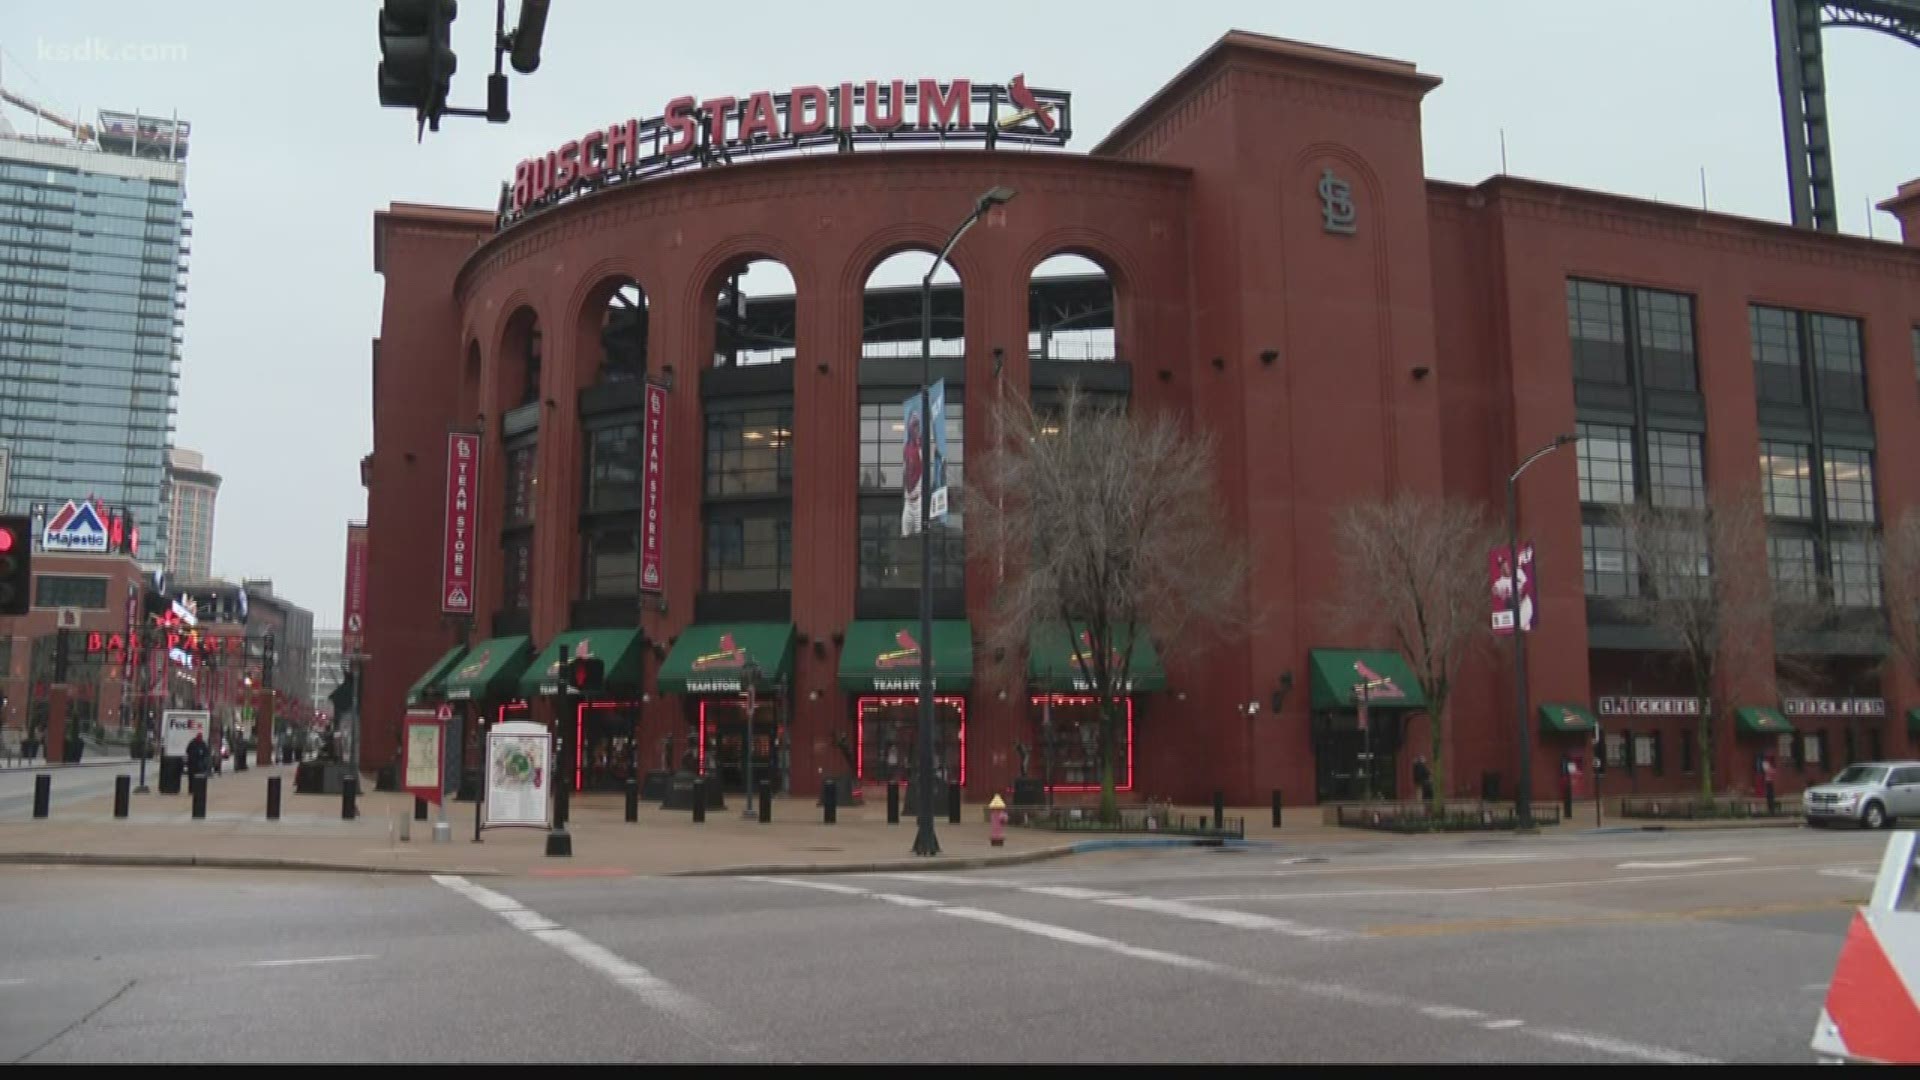 Several St. Louis sports teams have been impacted by the cancelations.